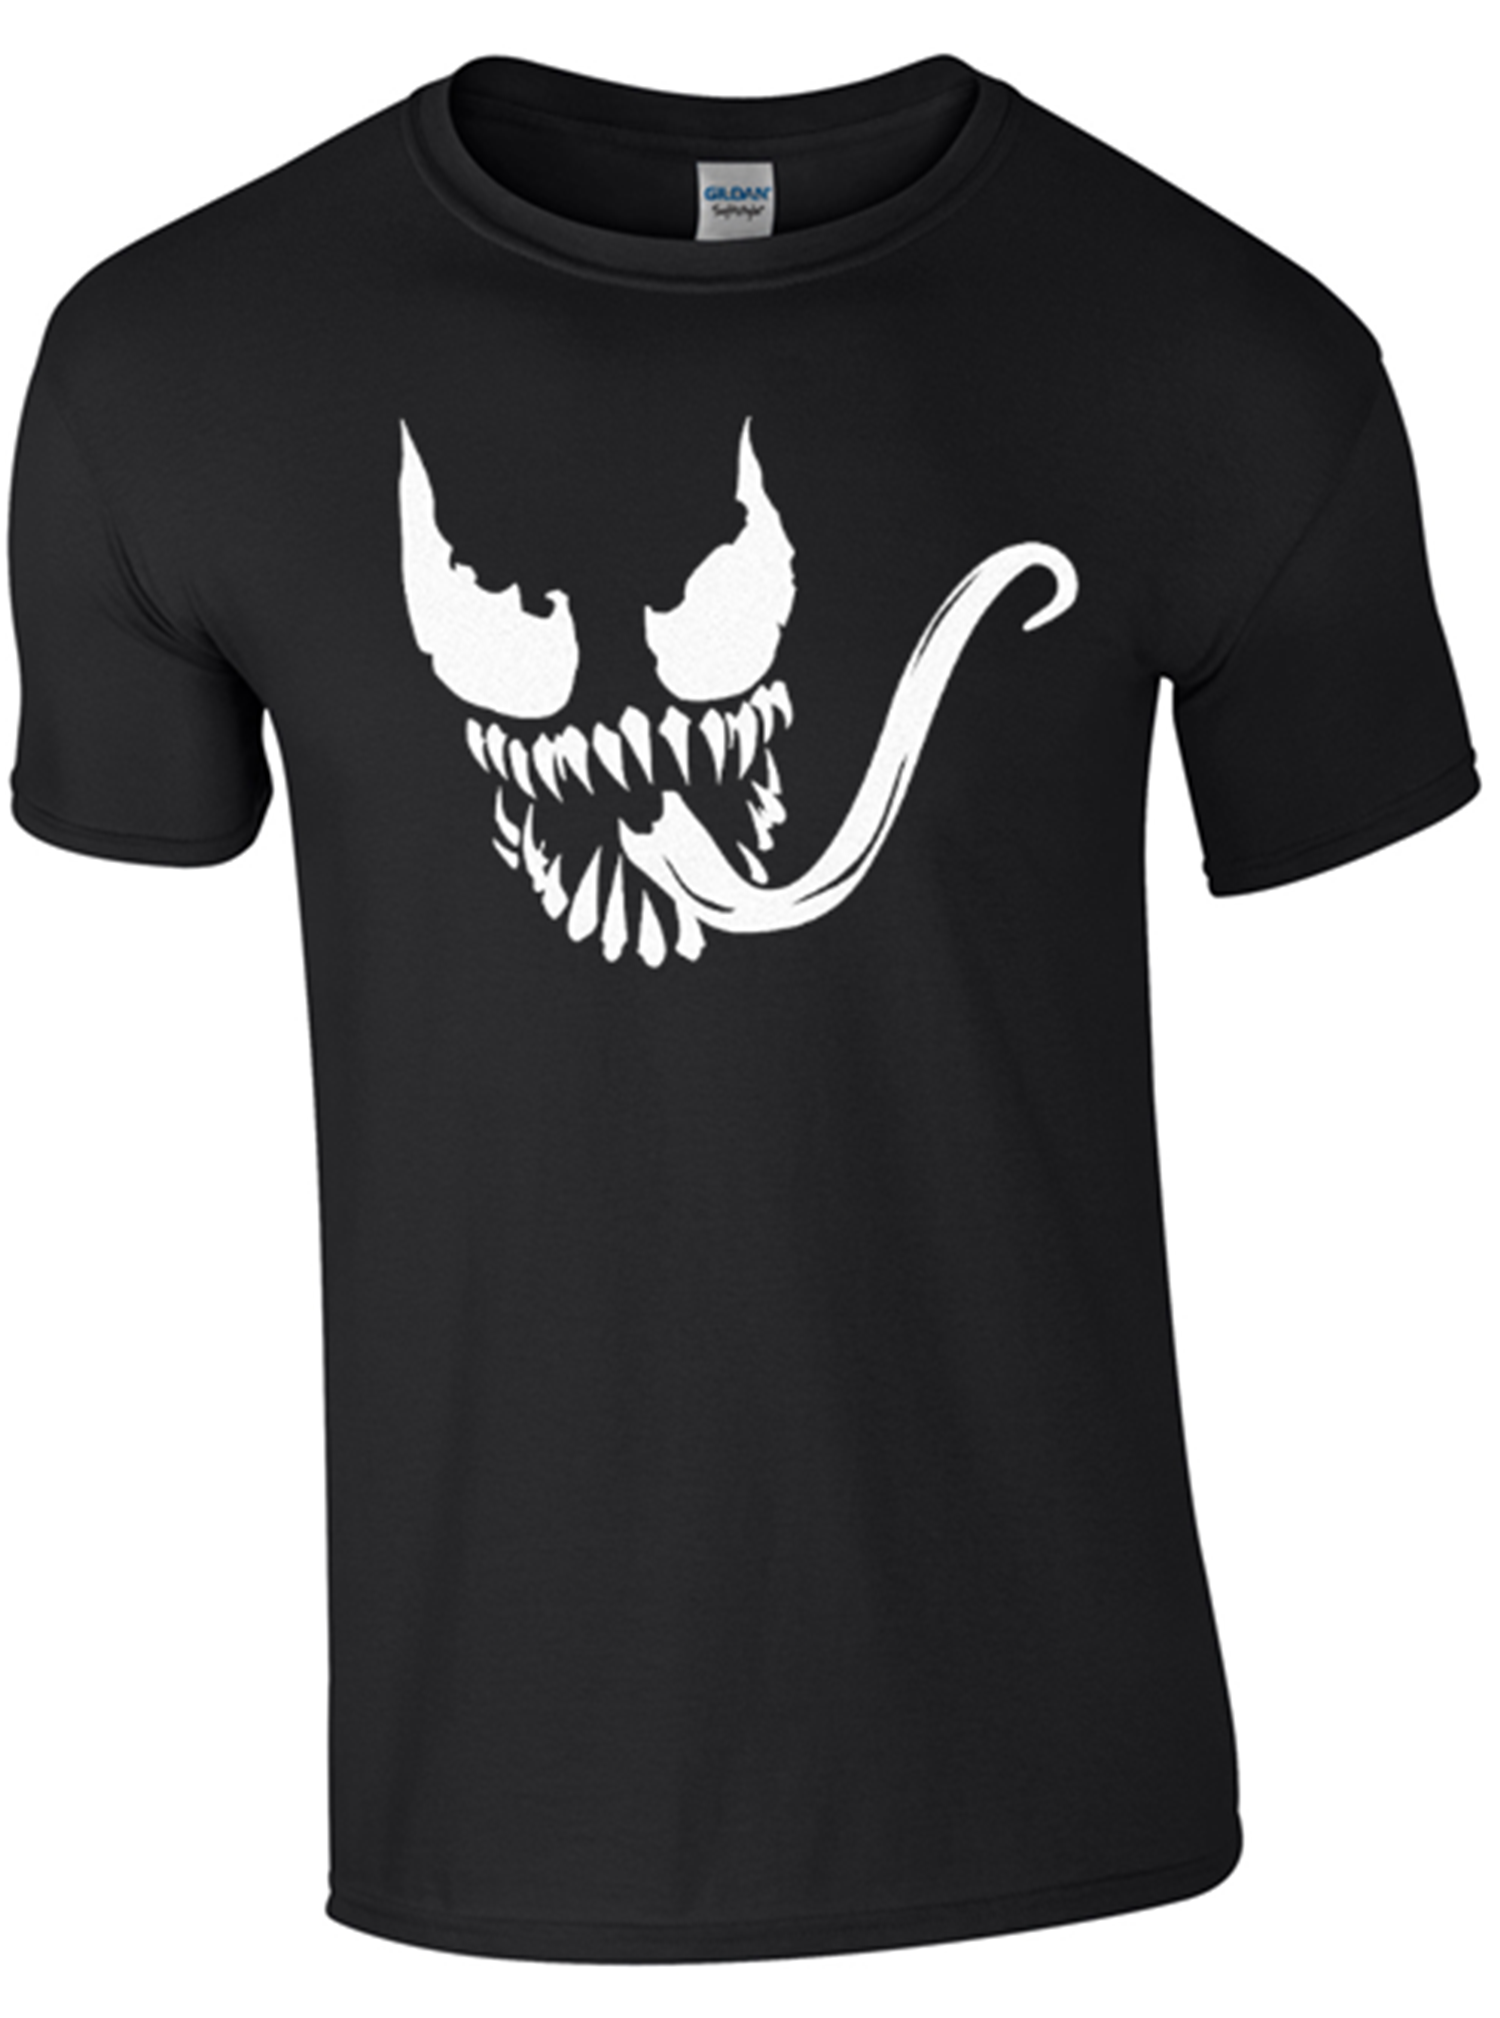 Scary Face T-Shirt Printed DTG (Direct to Garment) for a Permanent Finish. - Army 1157 kit Army 1157 Kit Veterans Owned Business